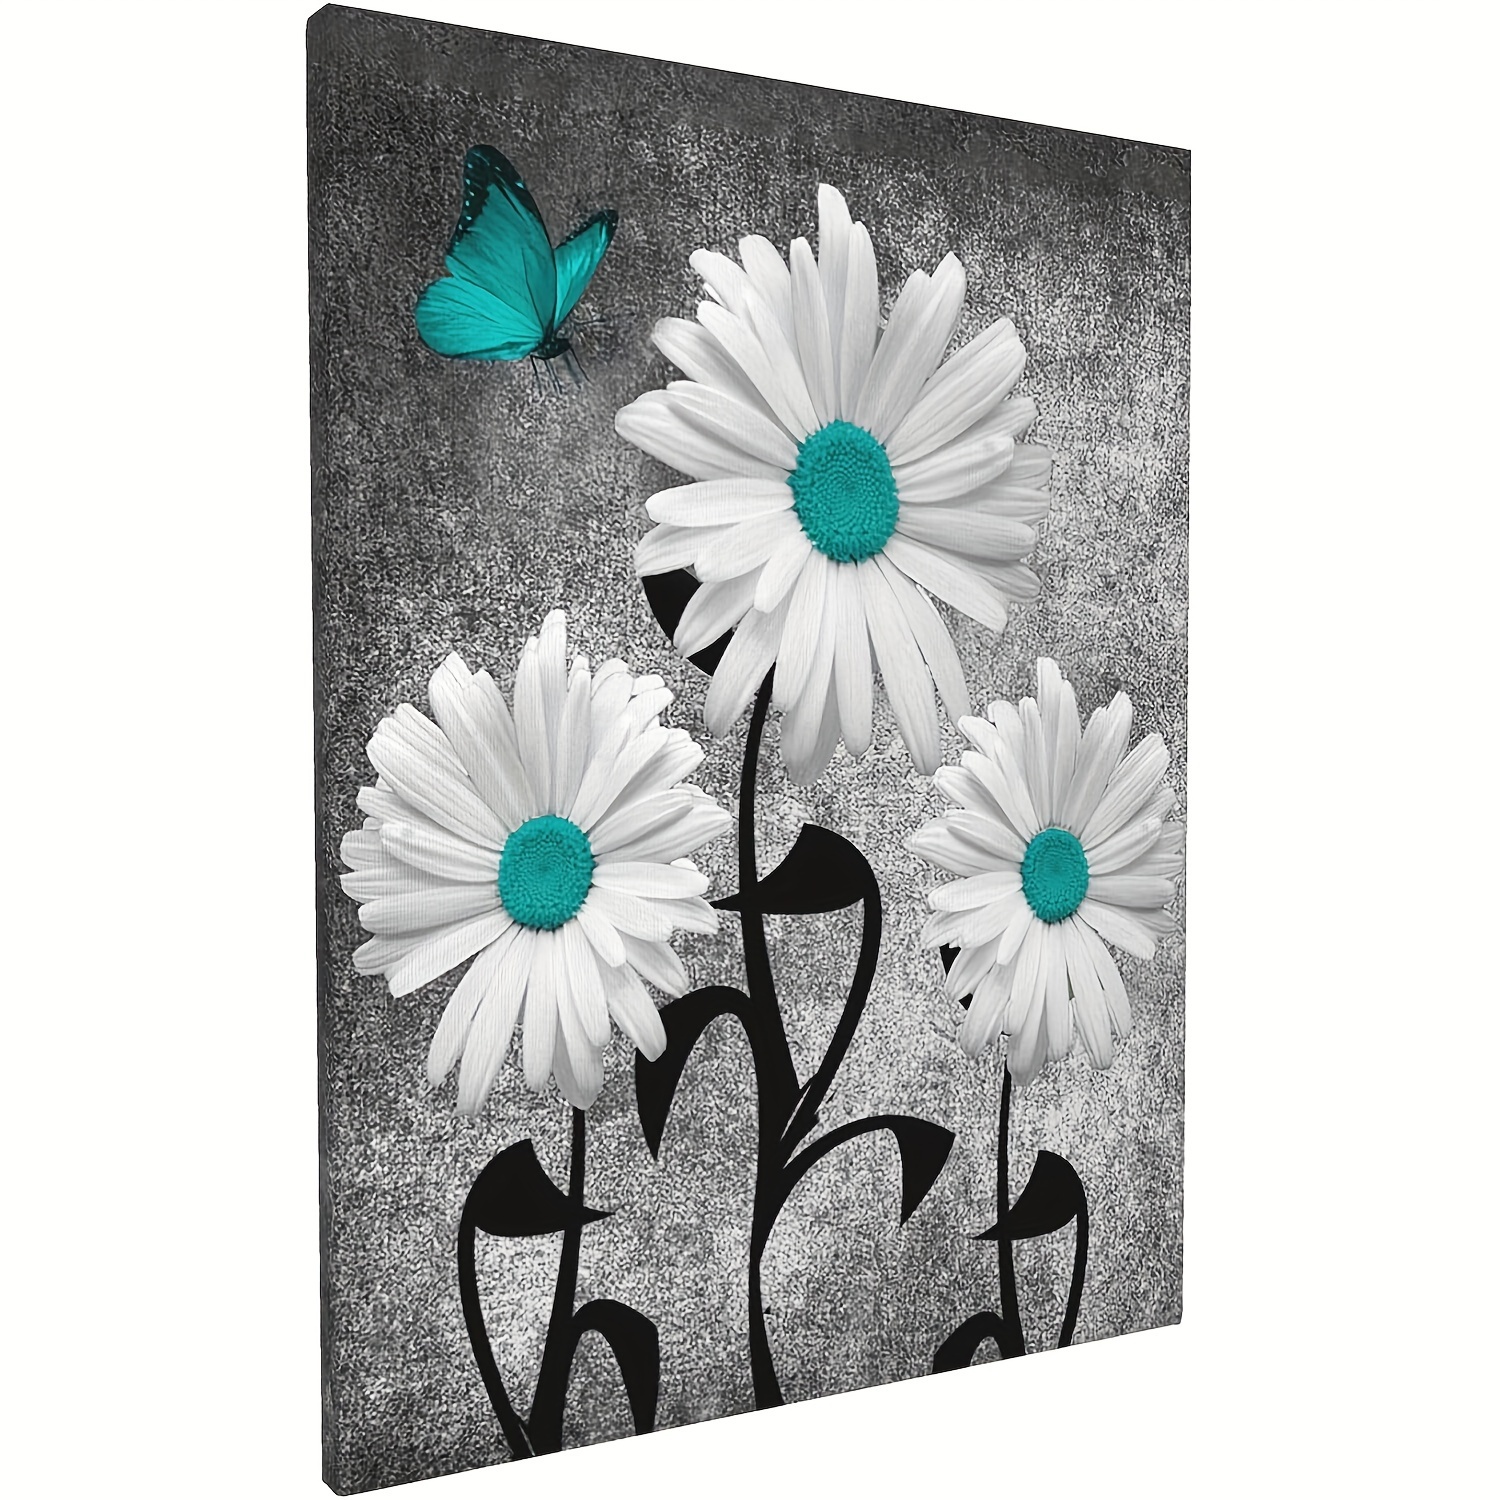 

1pc, Abstract Bathroom Decoration Canvas Wall Art, Teal Daisy Butterfly Farmhouse Flower Poster Black And White Inspirational Artwork Modern Can Be Hanged Directly Without Frame 12×16 Inches